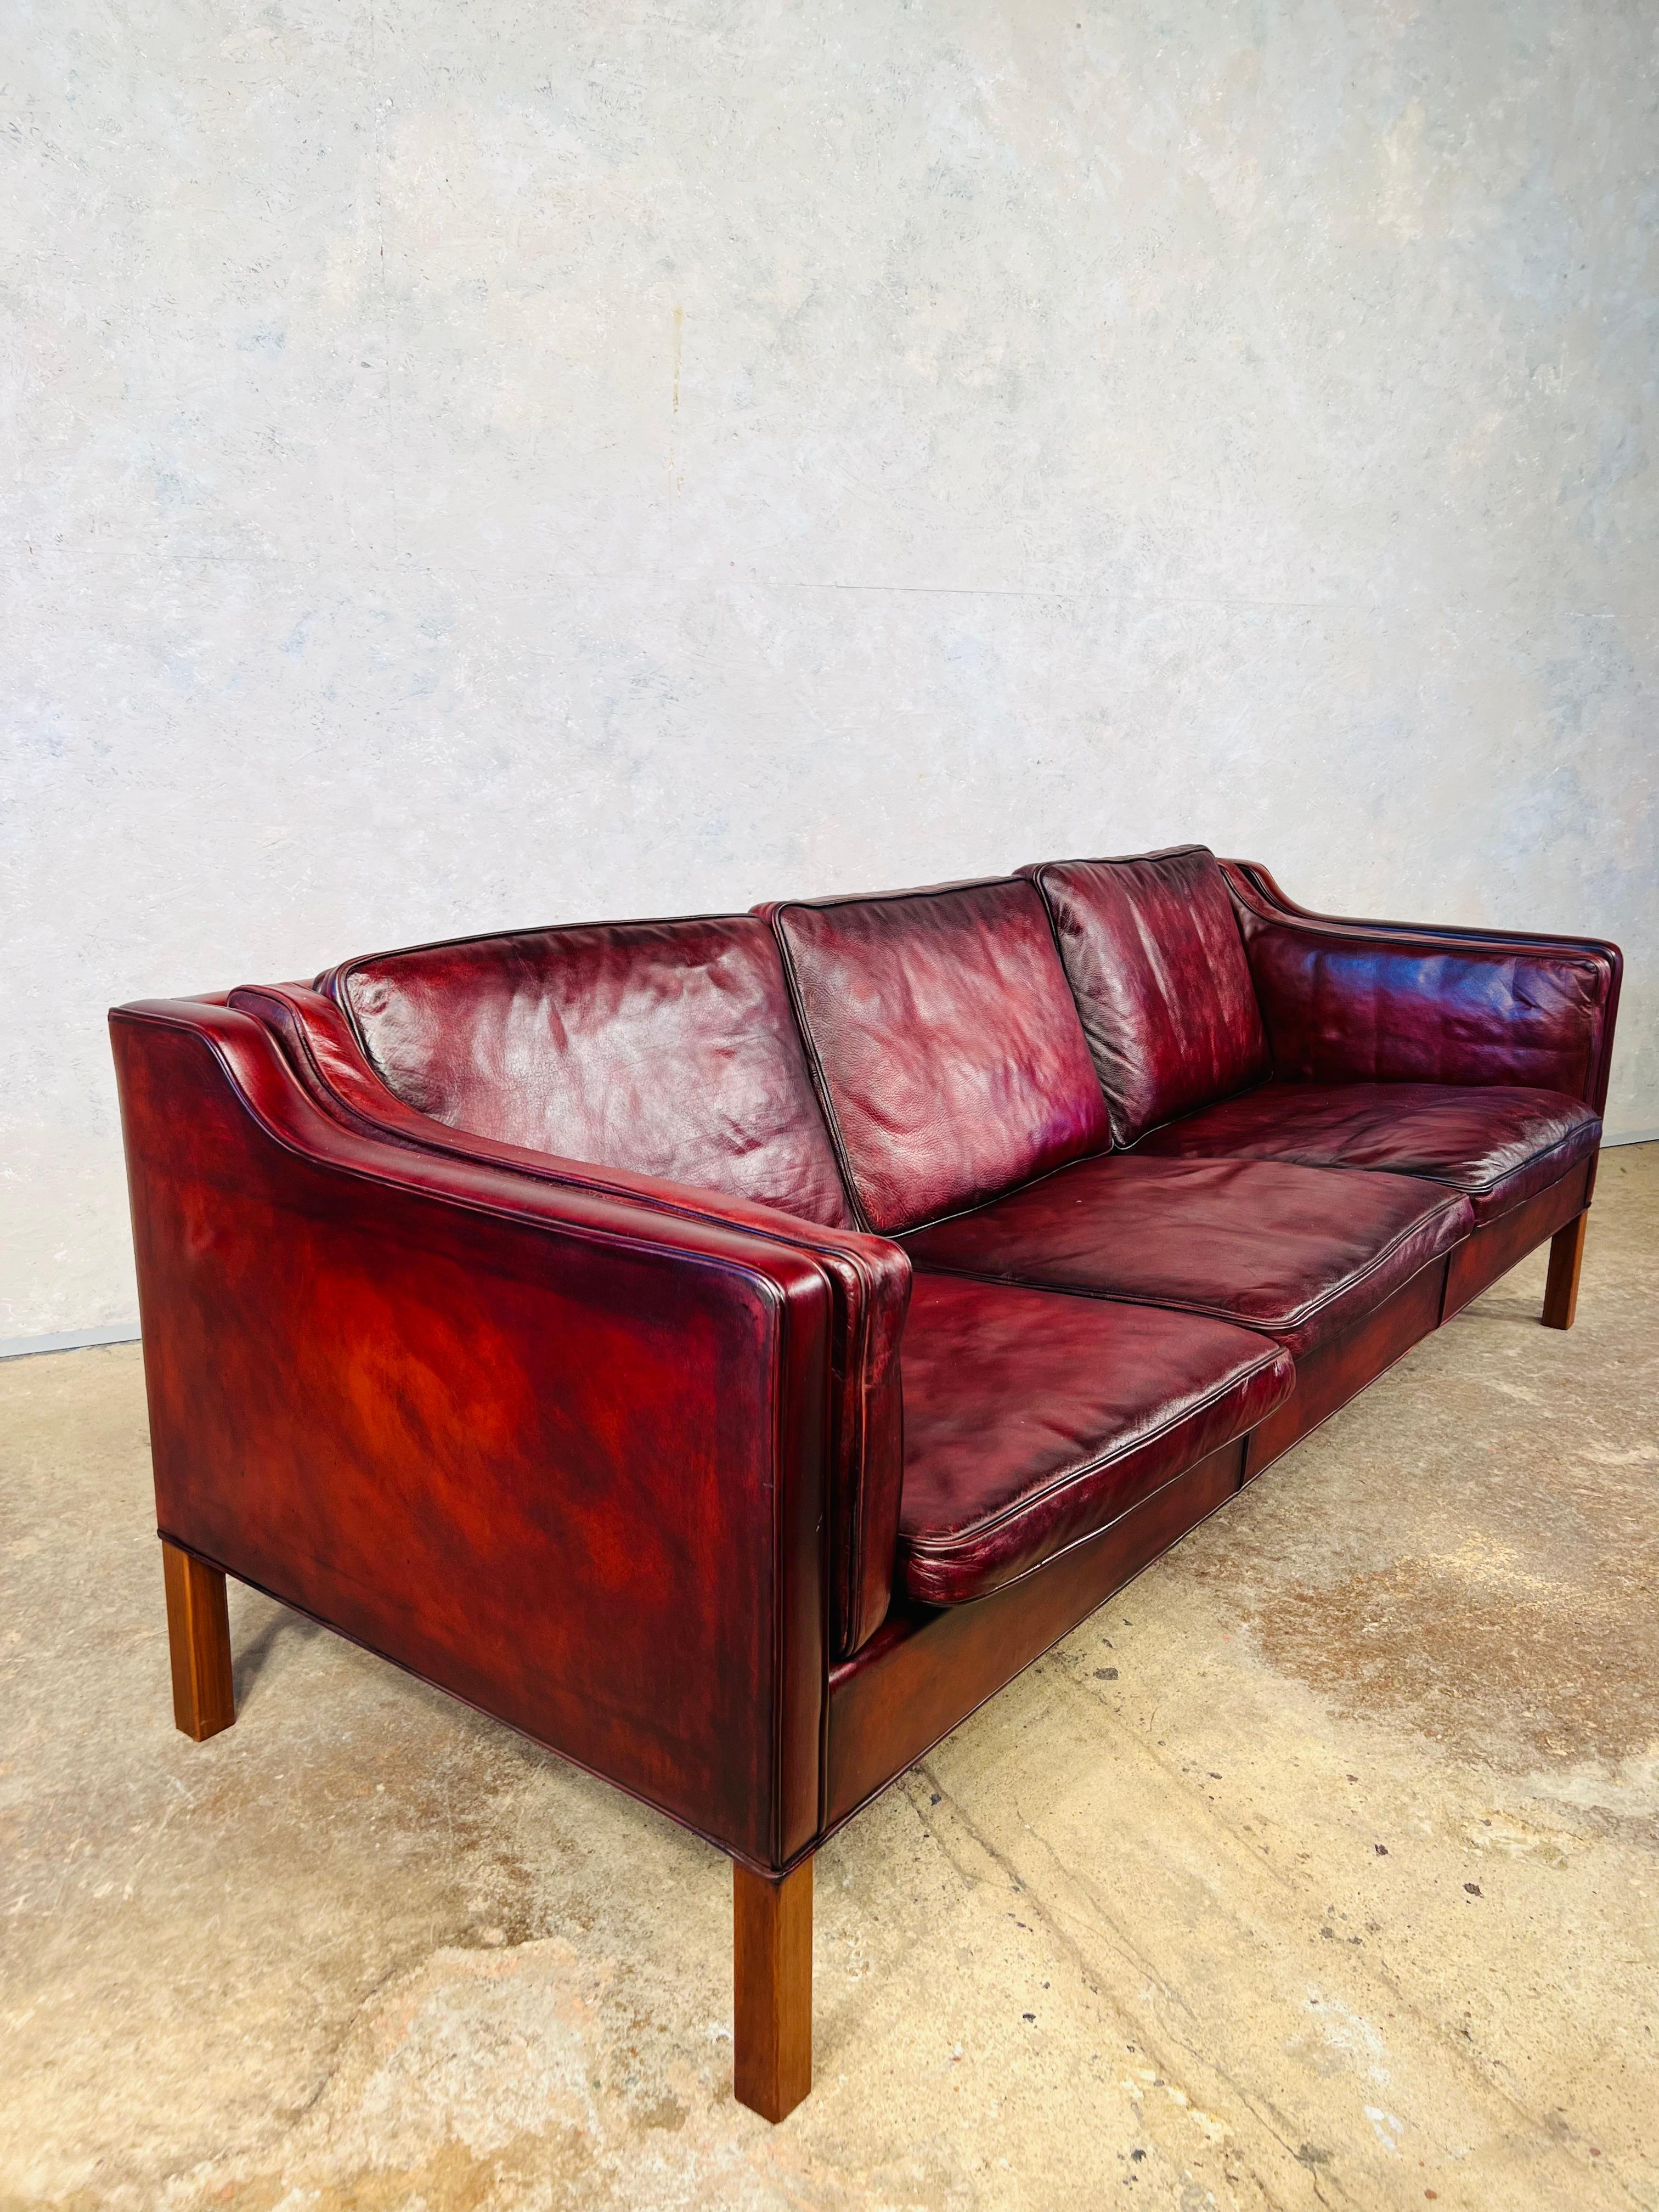 An Original Børge Mogensen Model 22213 for Frederica 1962, an exceptional quality sofa , with wonderful proportions and a stunning deep red colour , resting on solid teak feet .


Børge Mogensen advocated the idea that furniture should create a